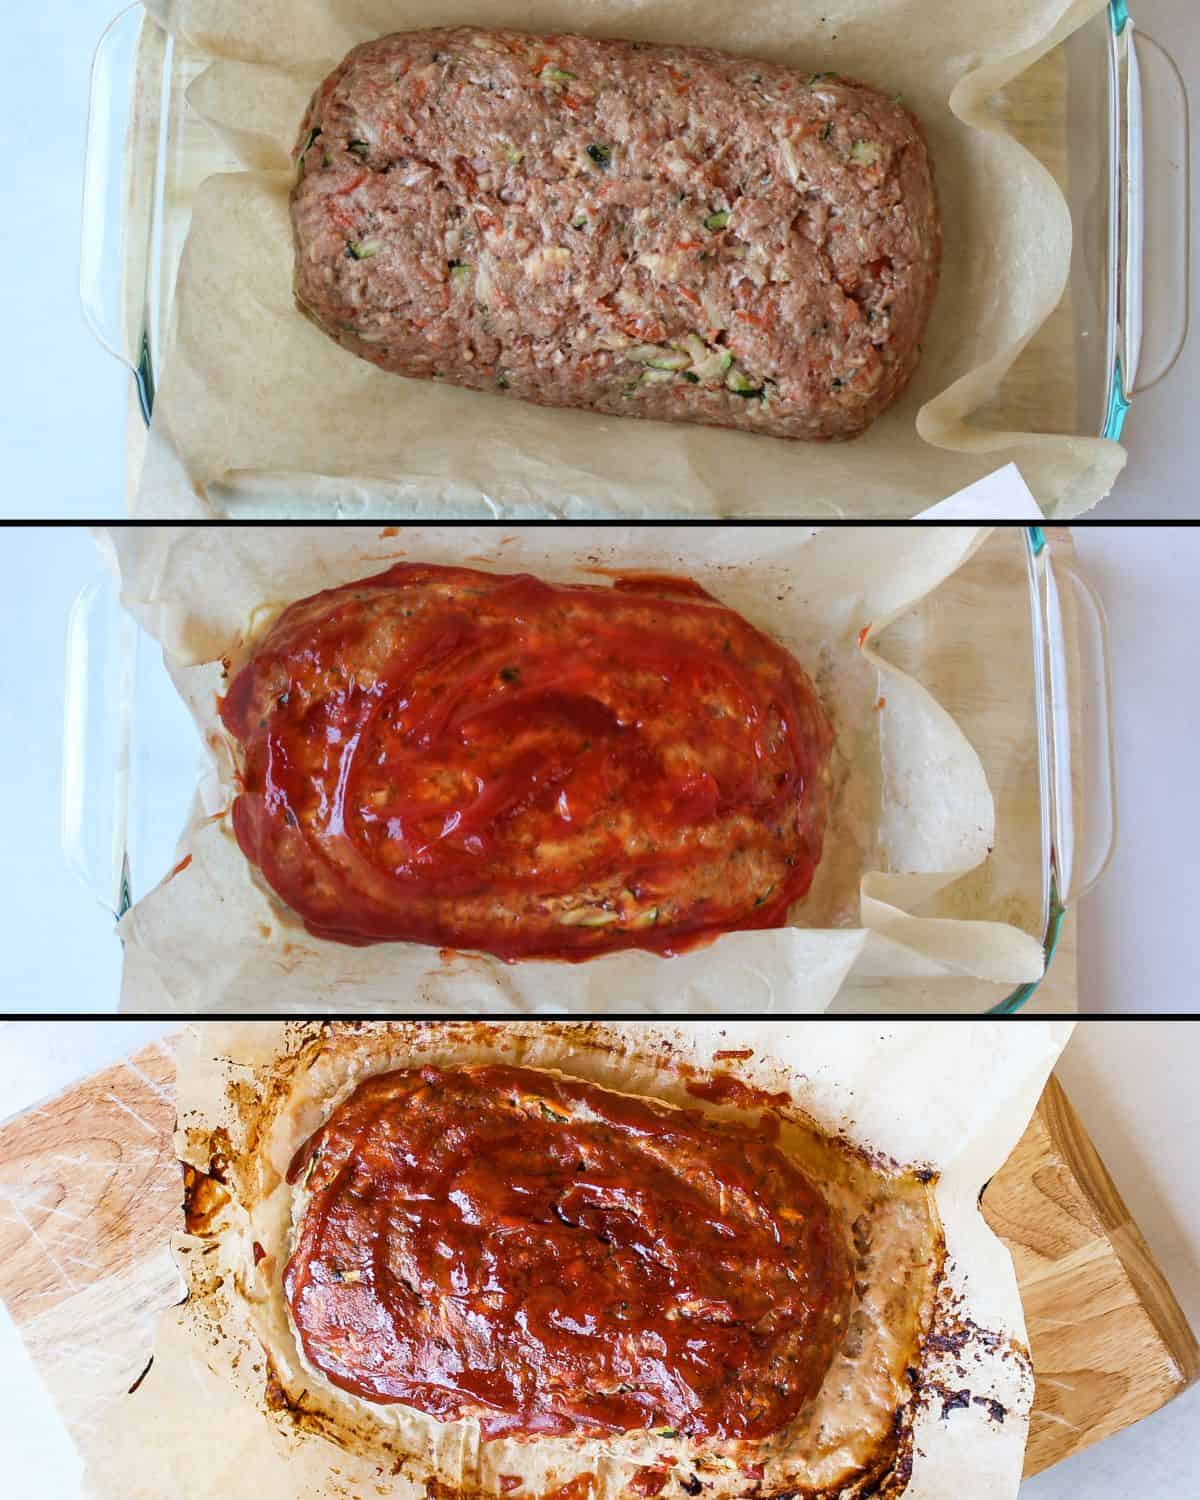 Uncooked meatloaf in a baking pan lined with parchment paper. A meatloaf topped with ketchup on top in a baking pan. Cooked meatloaf on top of a cutting board.